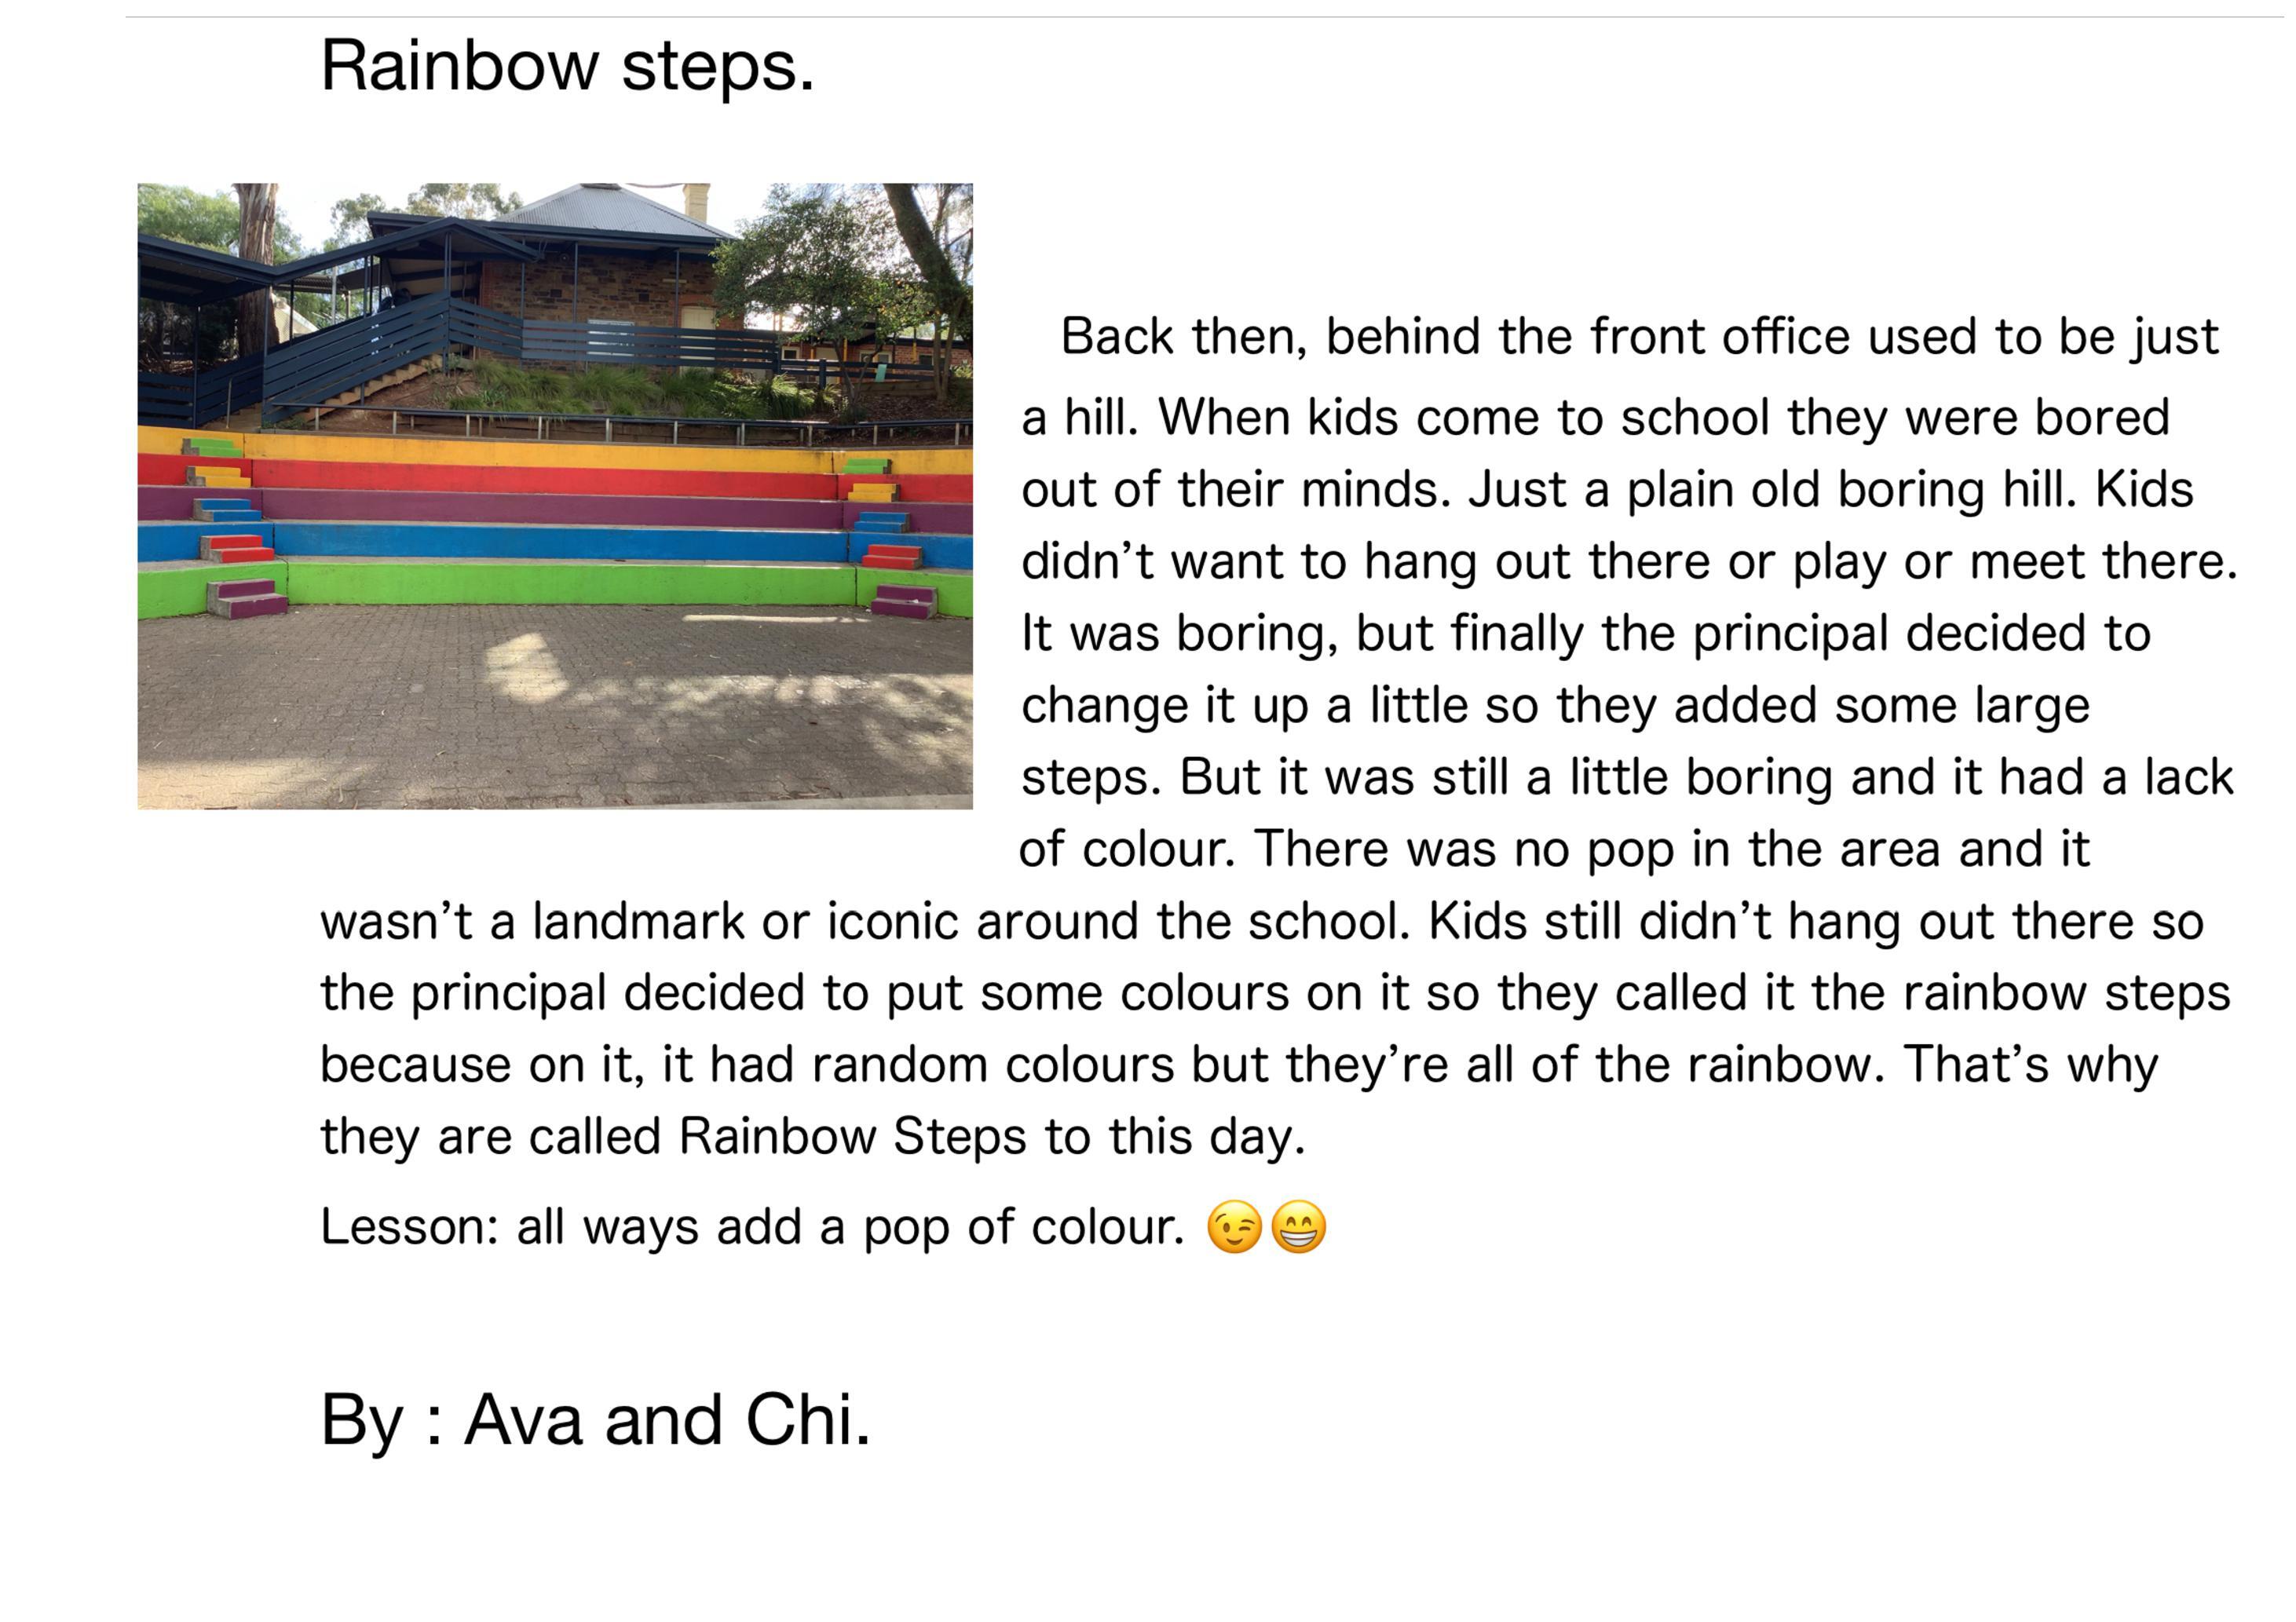 Rainbow steps dreaming story Ava and Chi